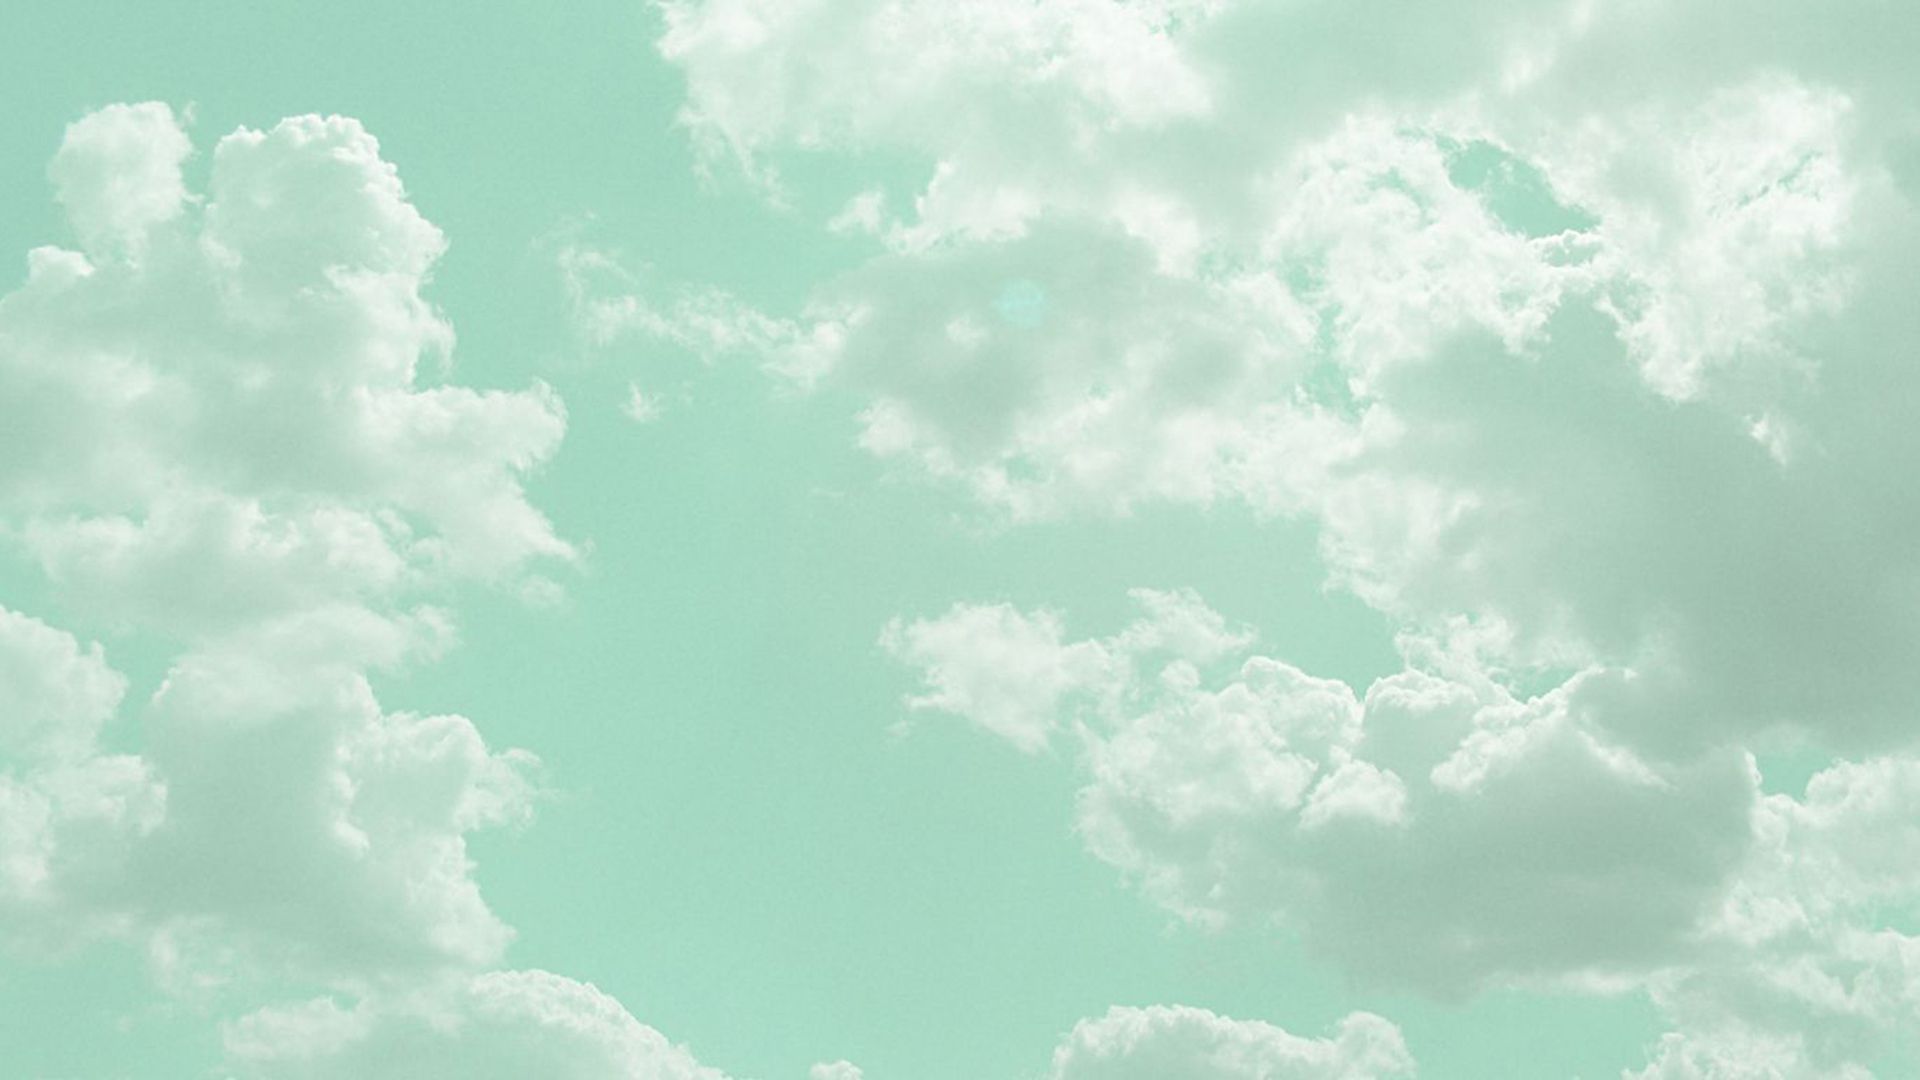 A plane flying in the sky with clouds - Mint green, pastel green